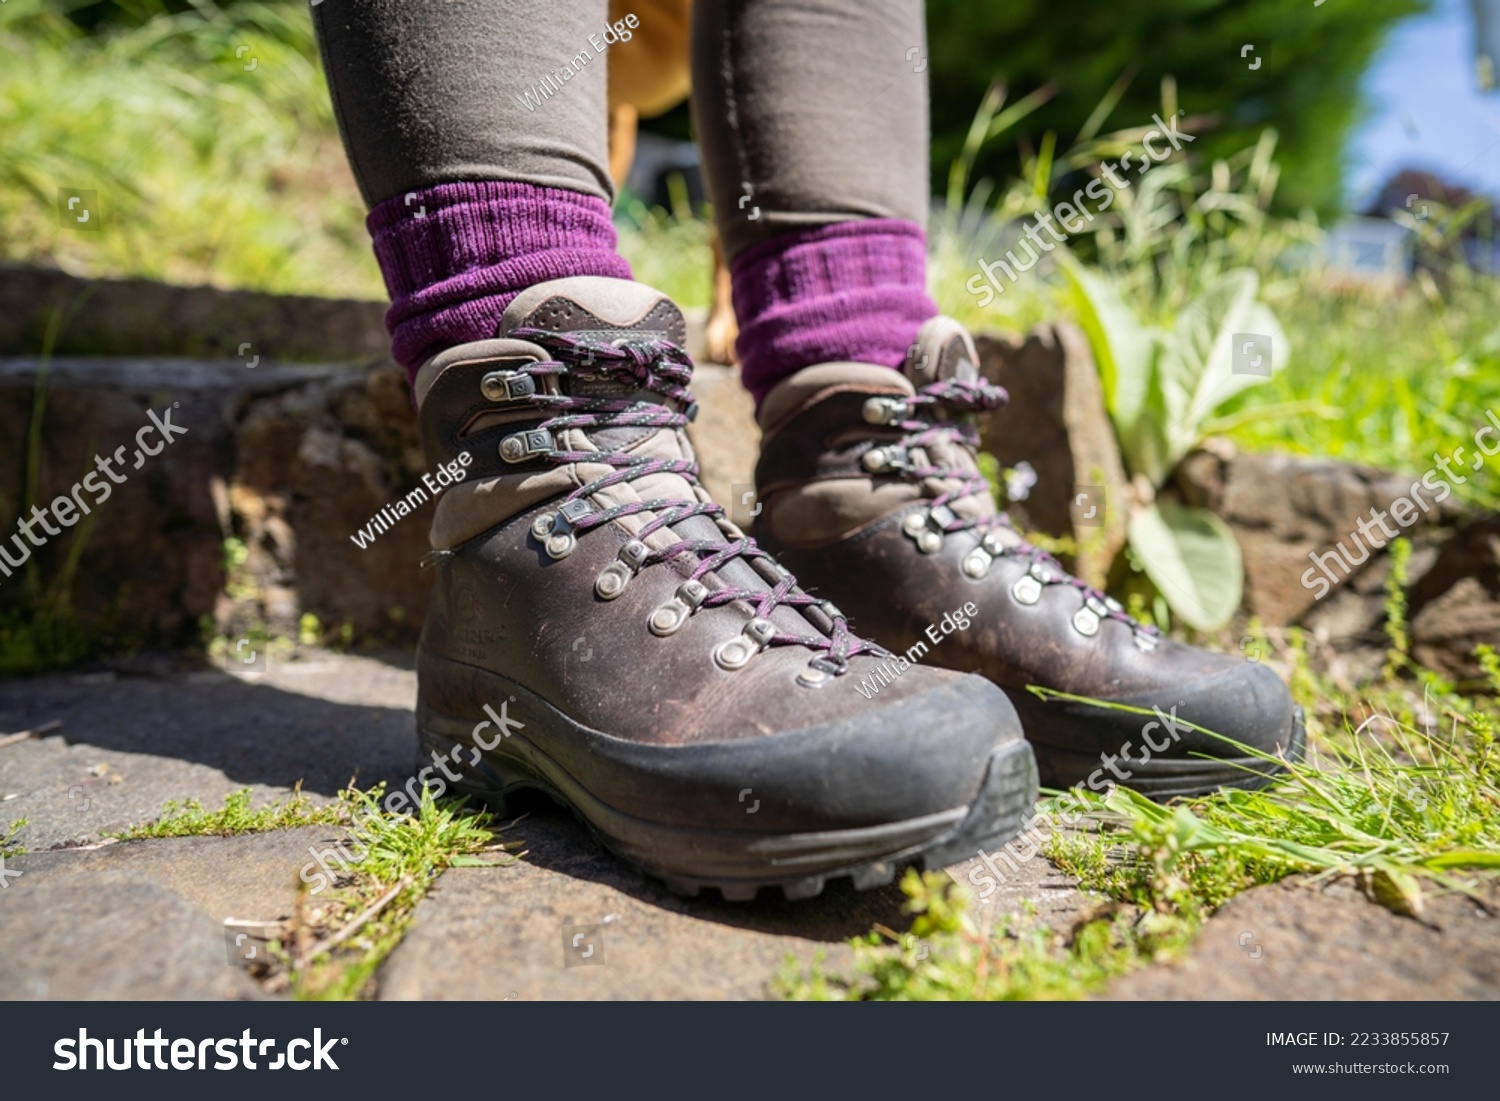 Tying shoelaces on hiking boots by a girl on a hike in spring #2233855857